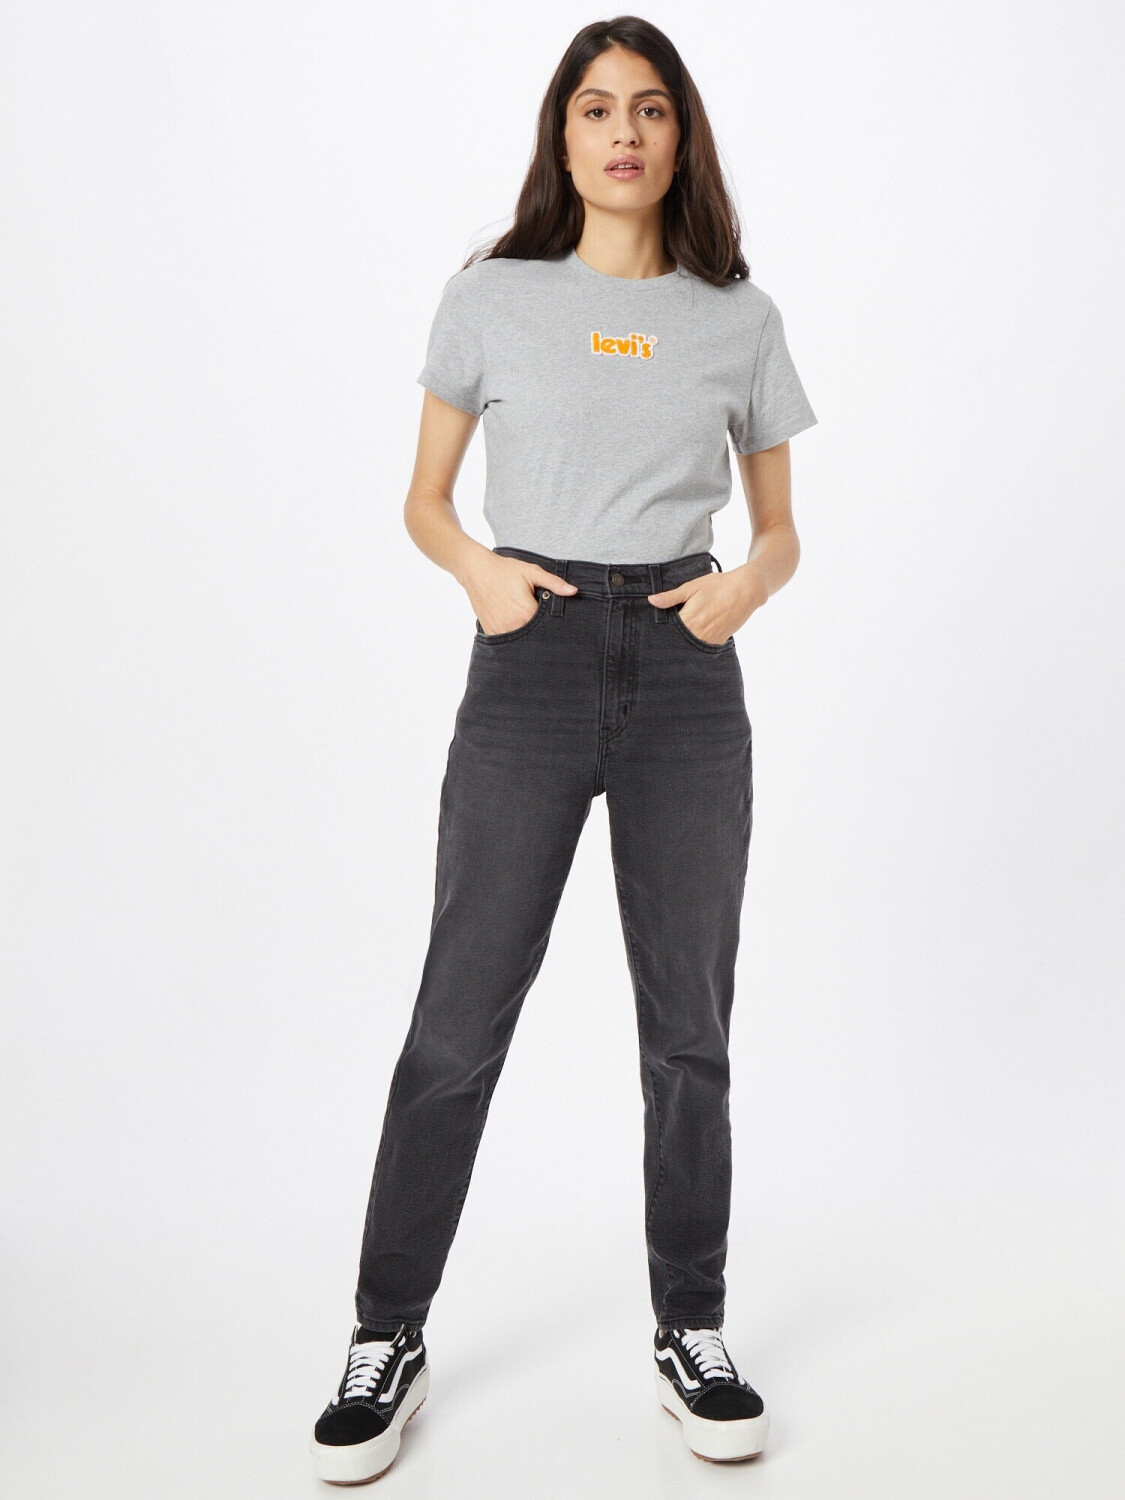 Levi's high waist mom jeans in black